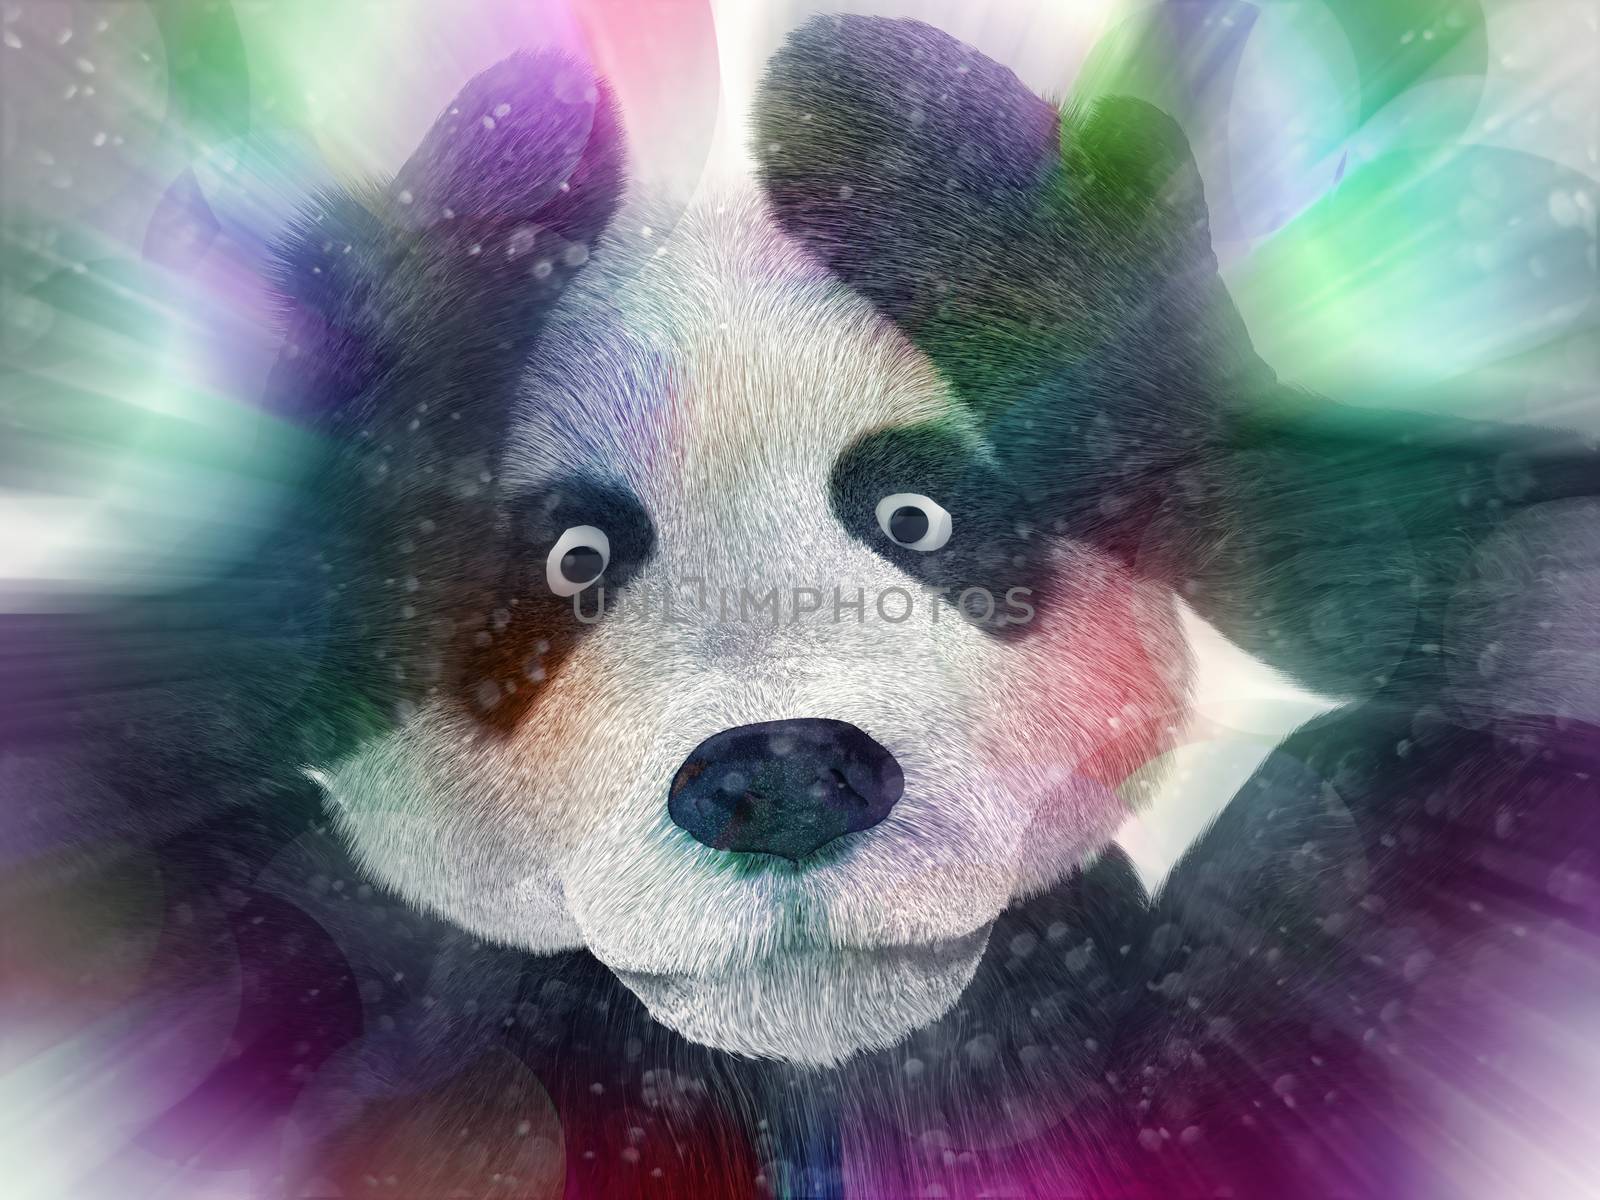 sick character panda bamboo junkie experiencing strong hallucinations and fear closes the muzzle paws. Psychedelic condition of the animal. by xtate